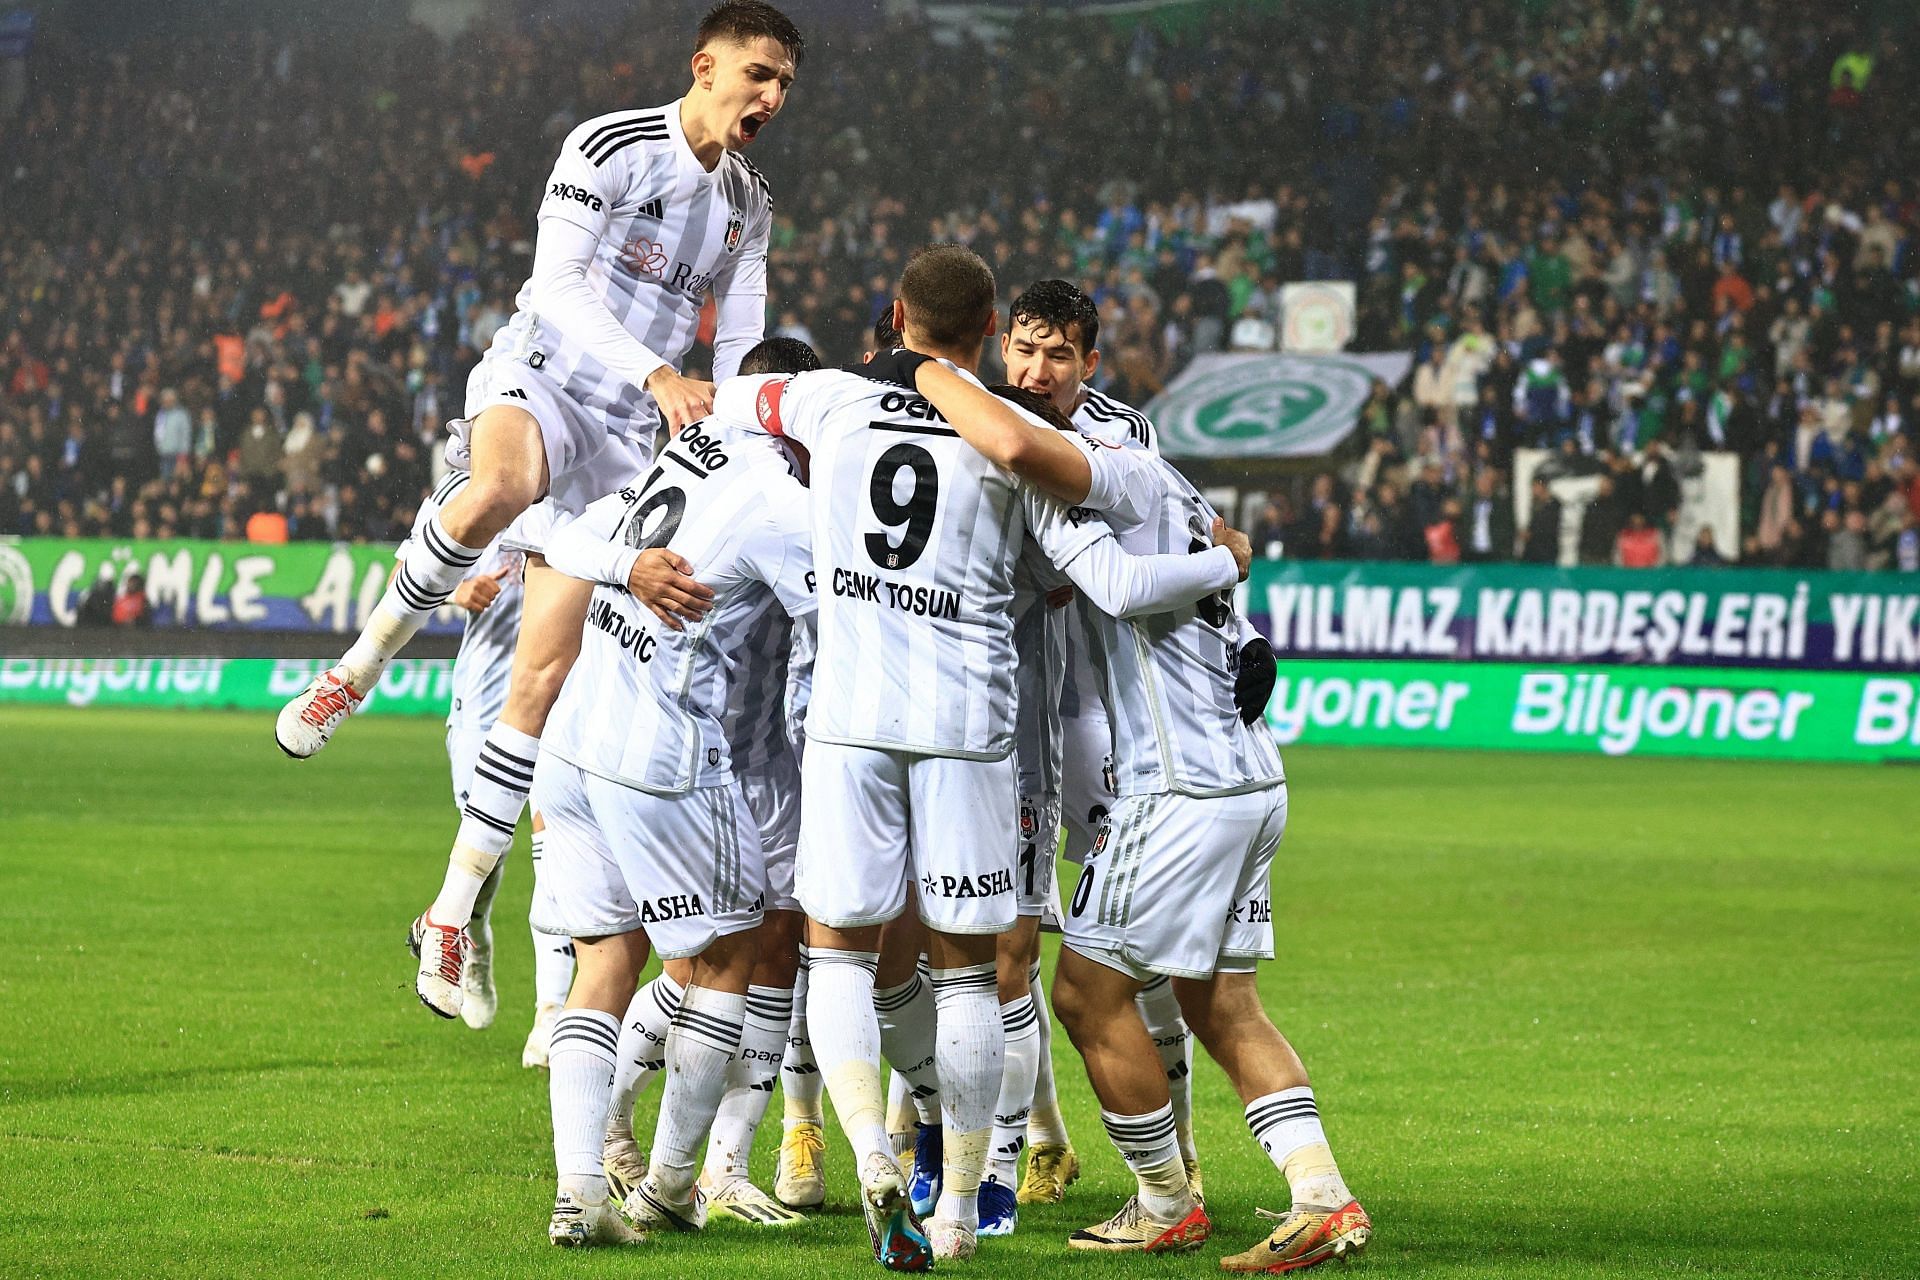 Besiktas host Eyup on Tuesday in the cup